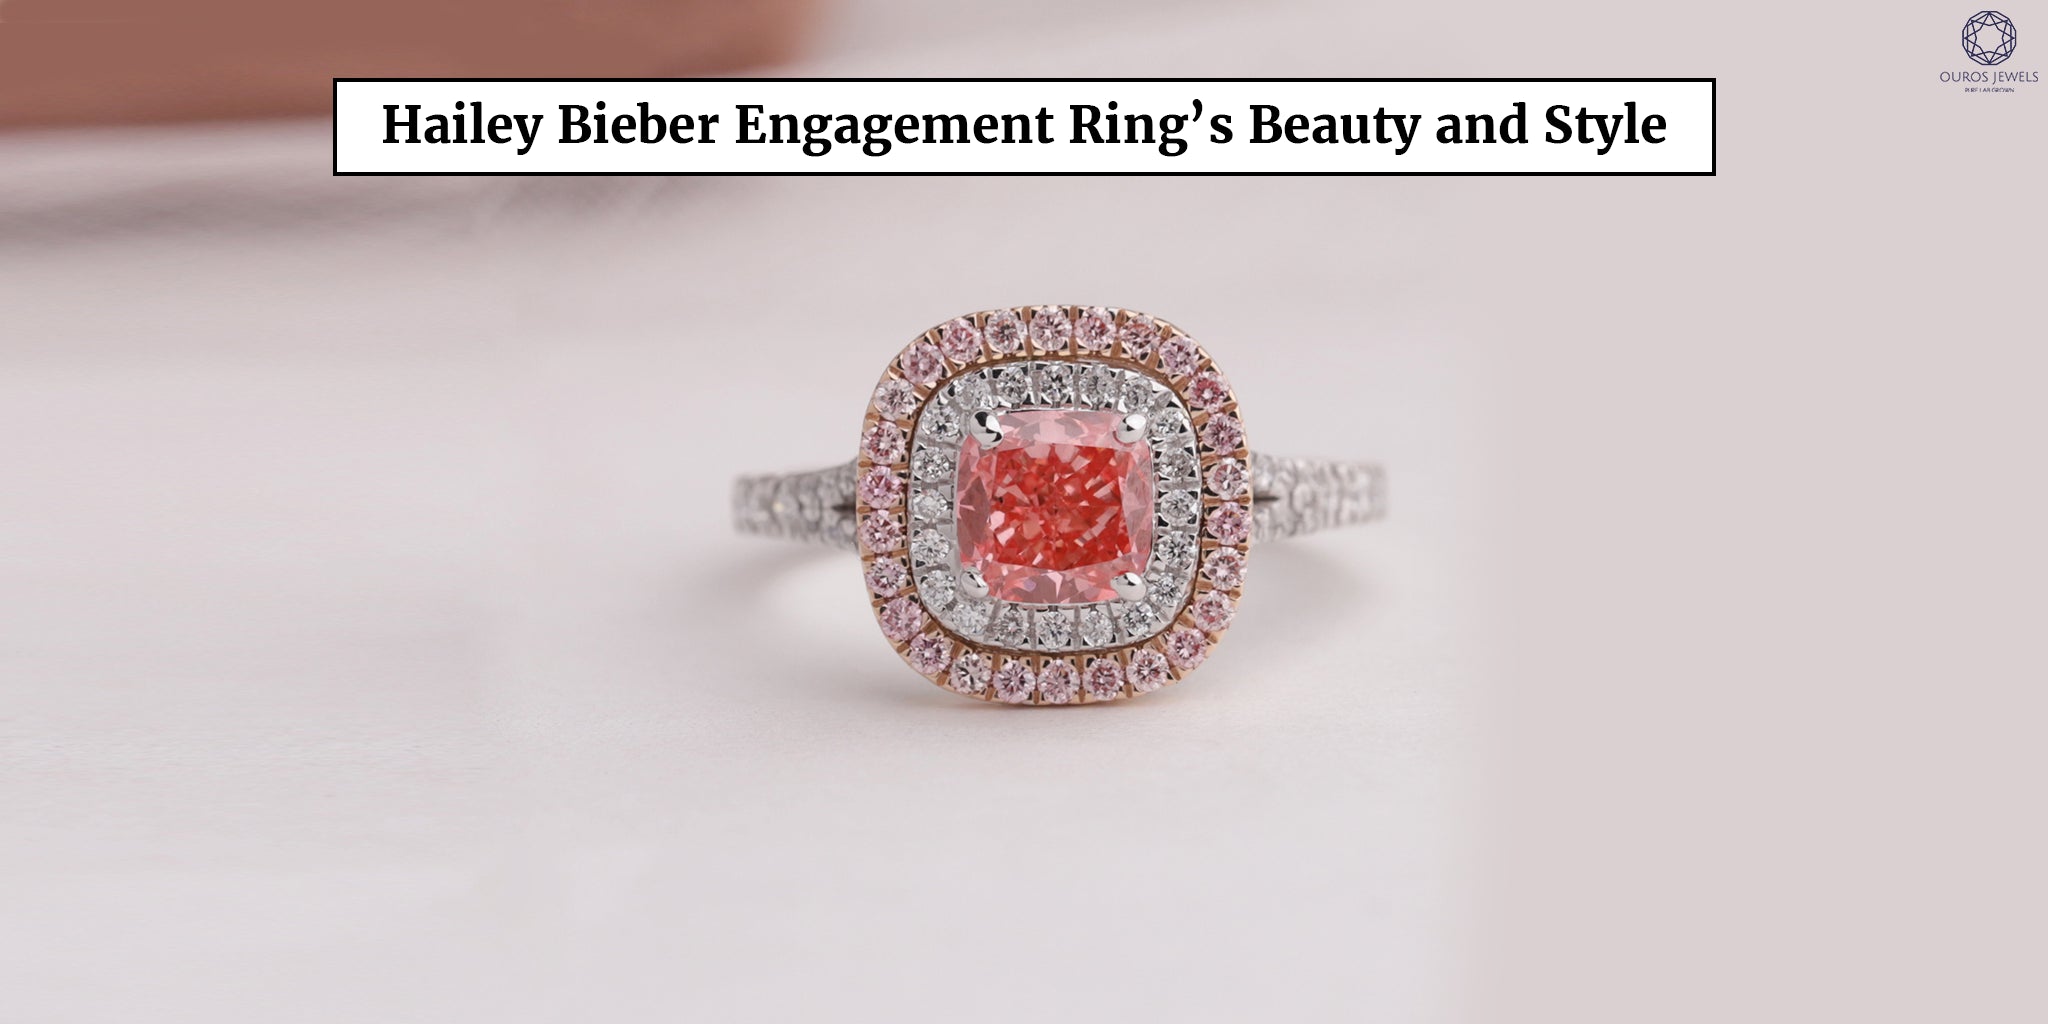 All About Hailey Baldwin Bieber's Engagement Ring | With Clarity